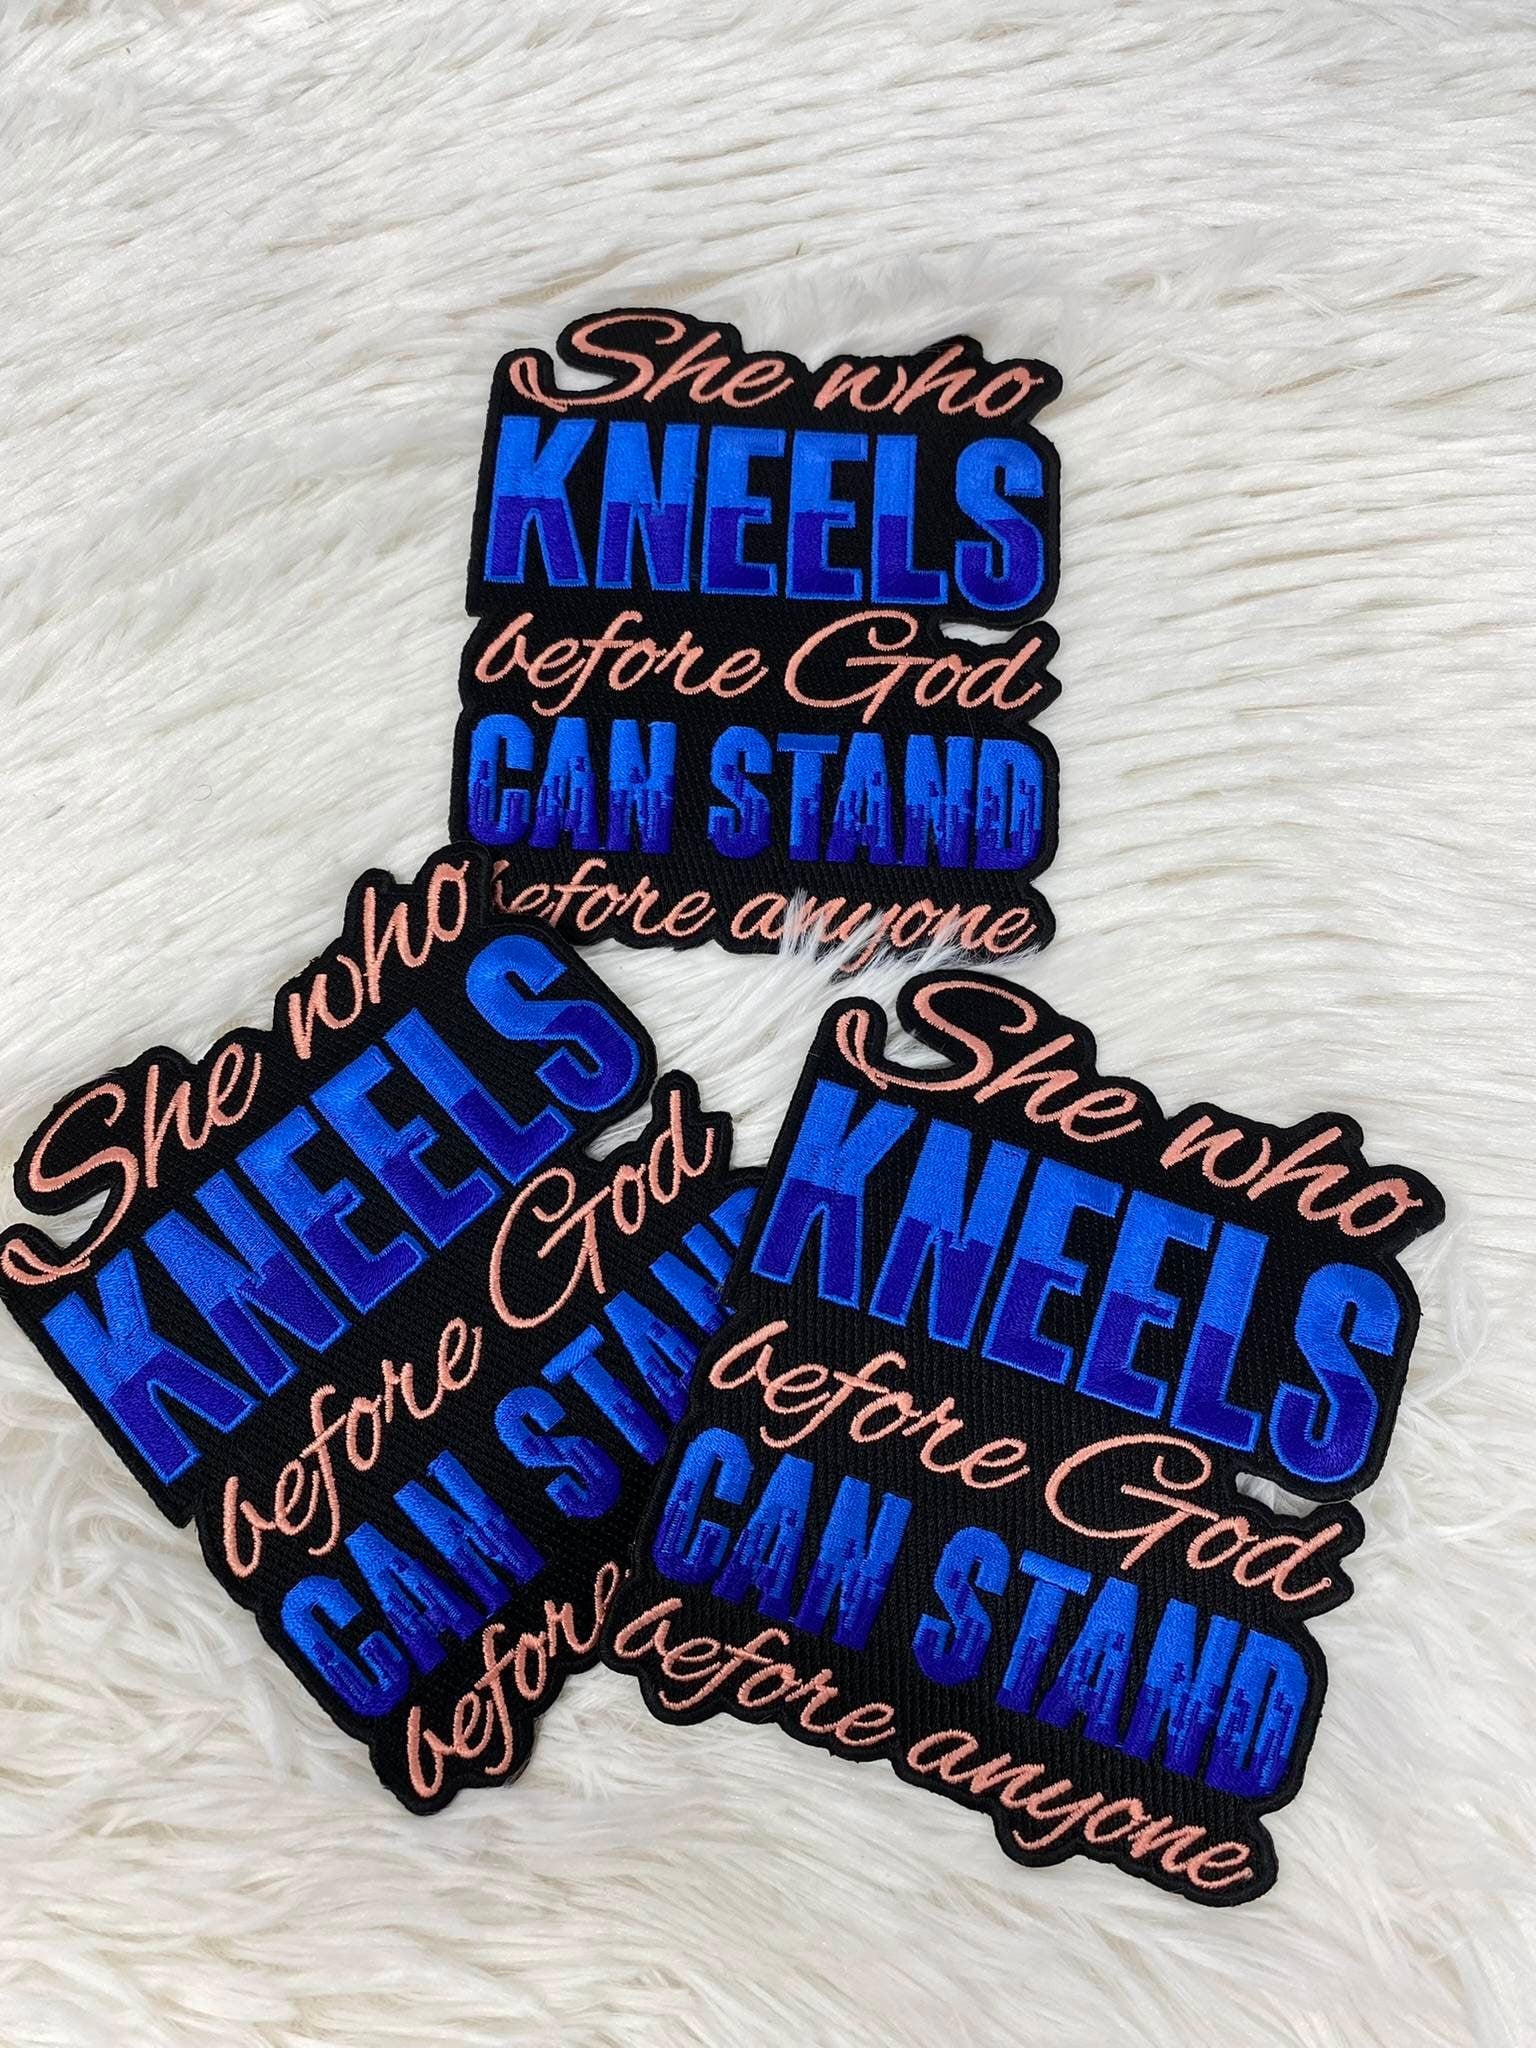 NEW, 1-pc "She Who Kneels..."  Size 4" x 3.75" Iron-on Embroidered Patch; Cool Patch for Hats, Empowerment Patch, Great patch for Jackets